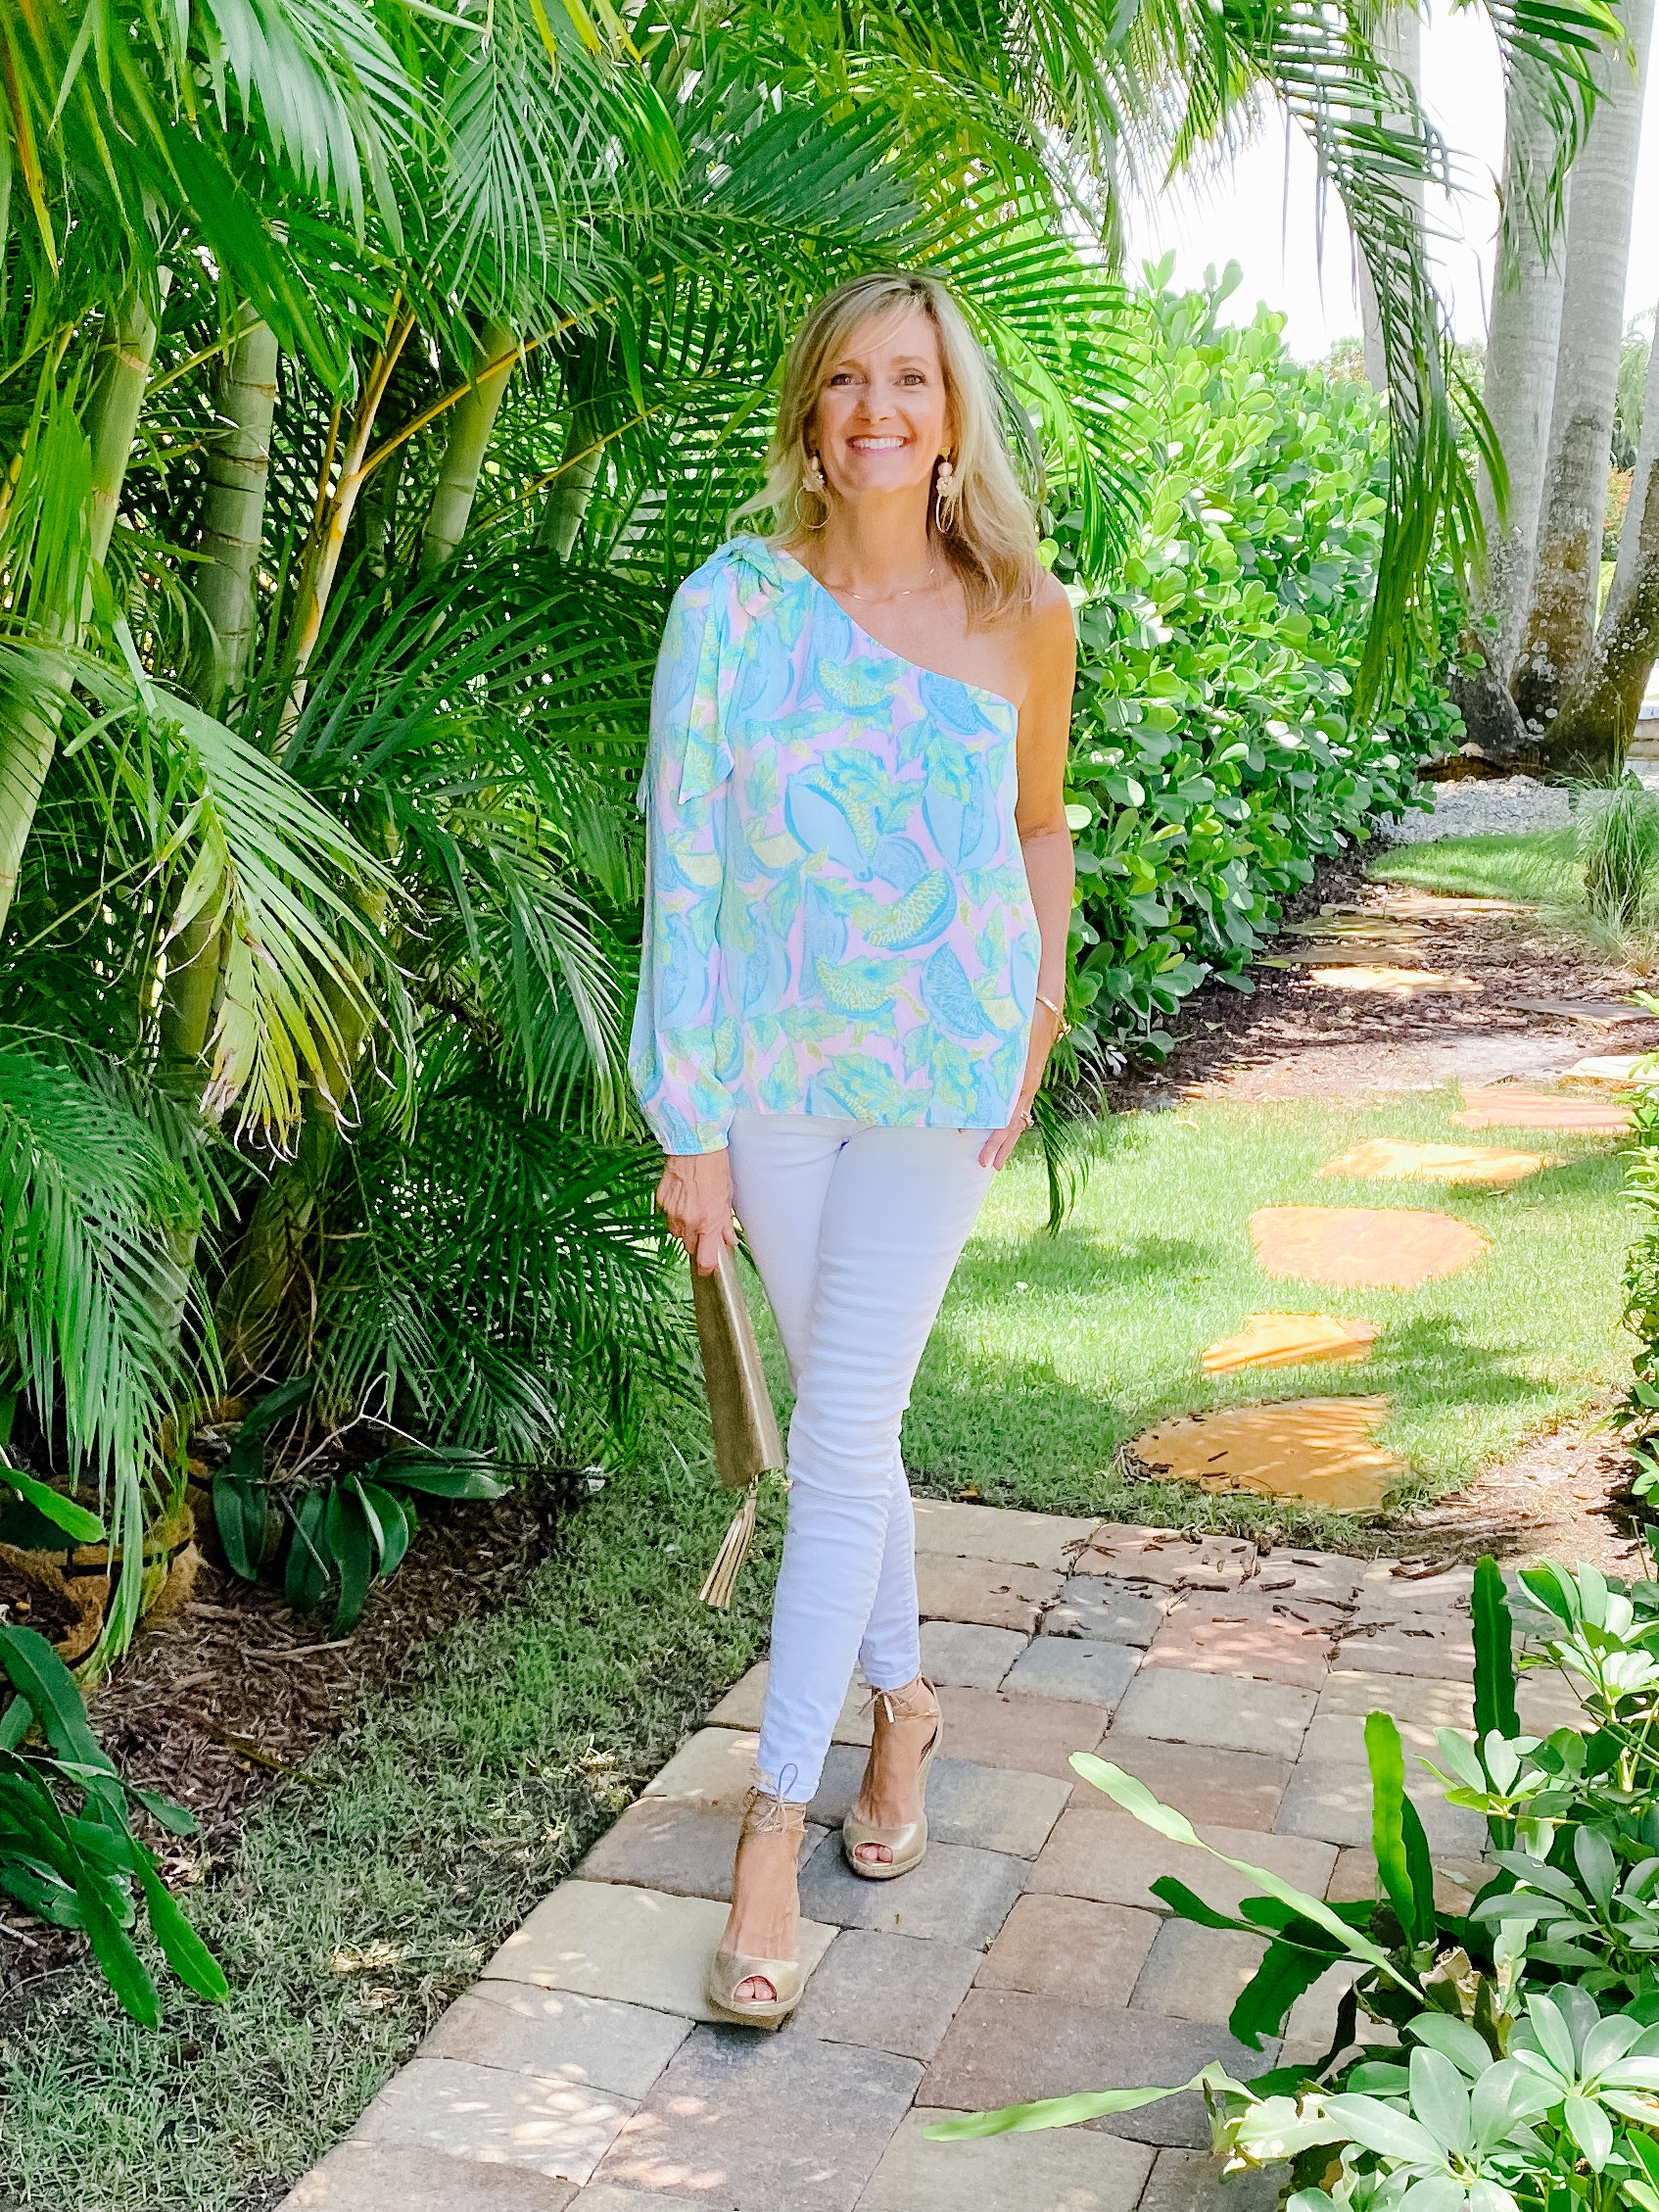 Lilly Pulitzer top and White Jeans For Date Night! 5 outfit ideas for women over 50.